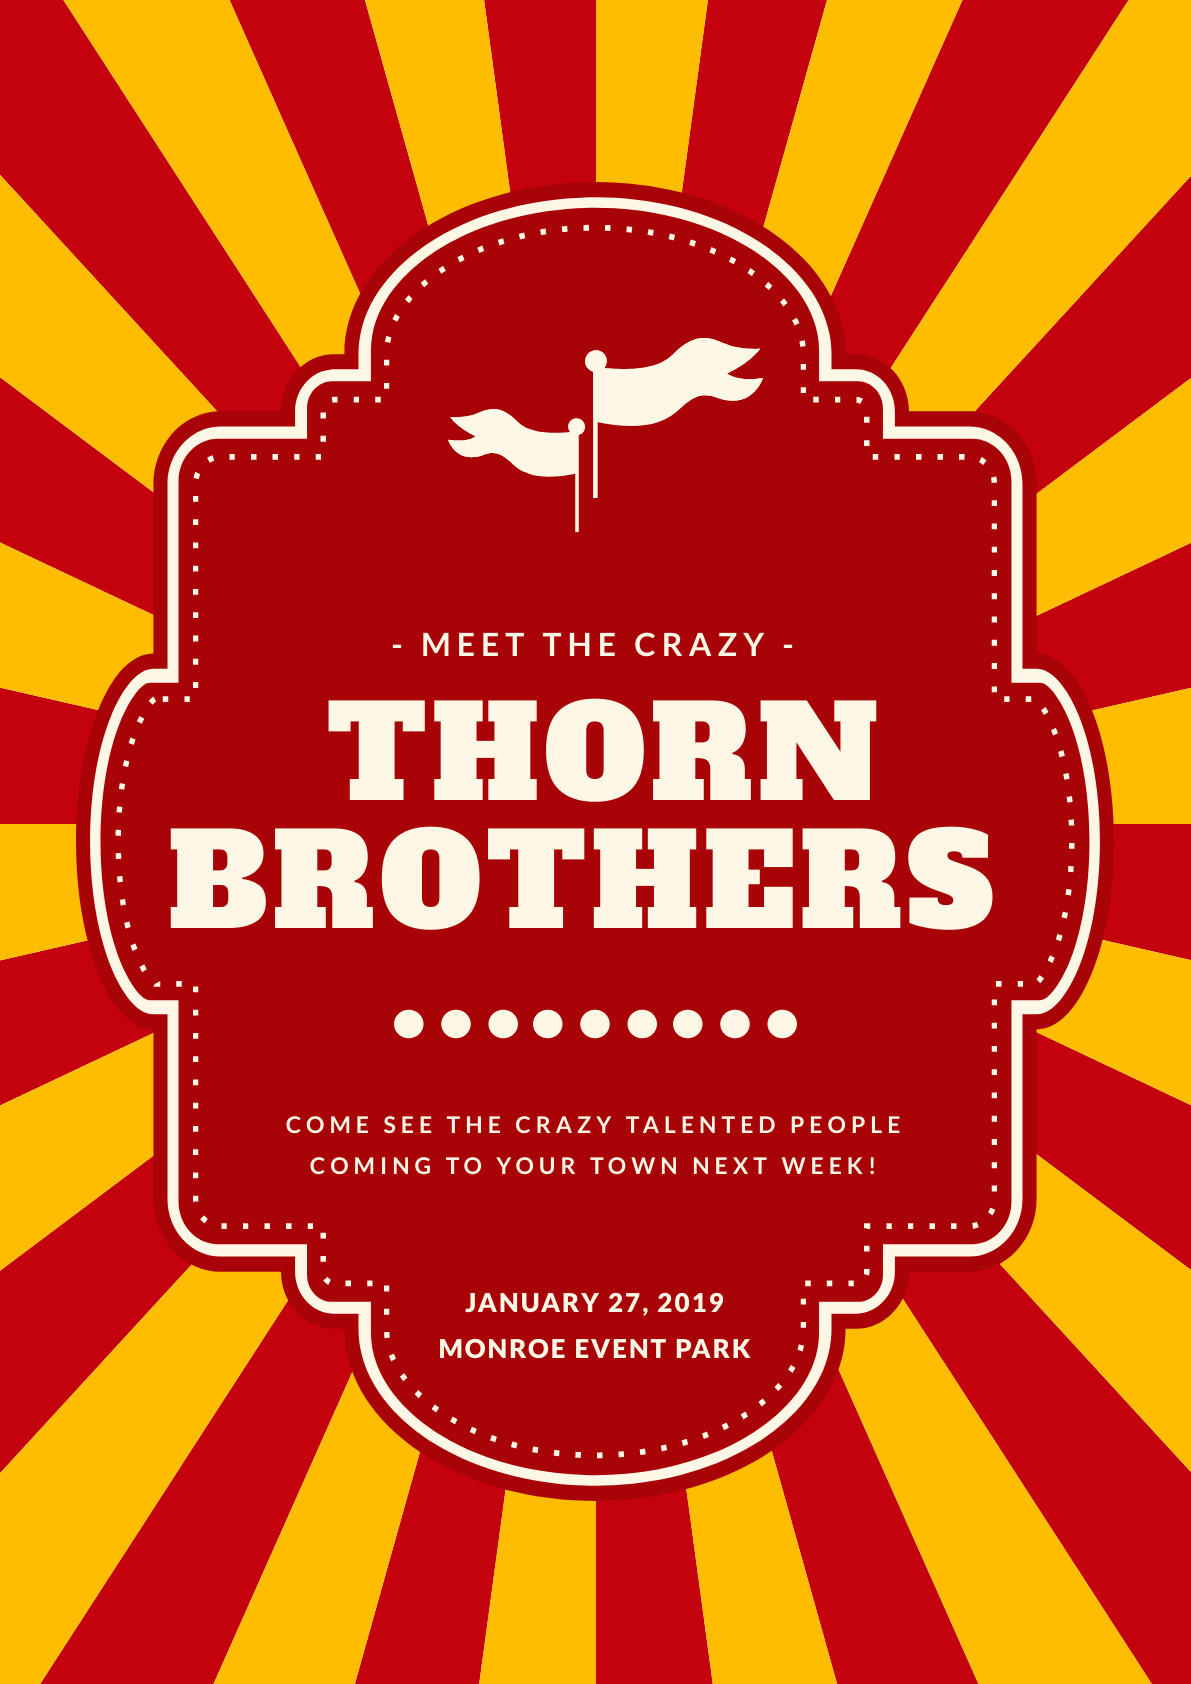 Thorn Brothers Circus – Poster Template 1191x1684